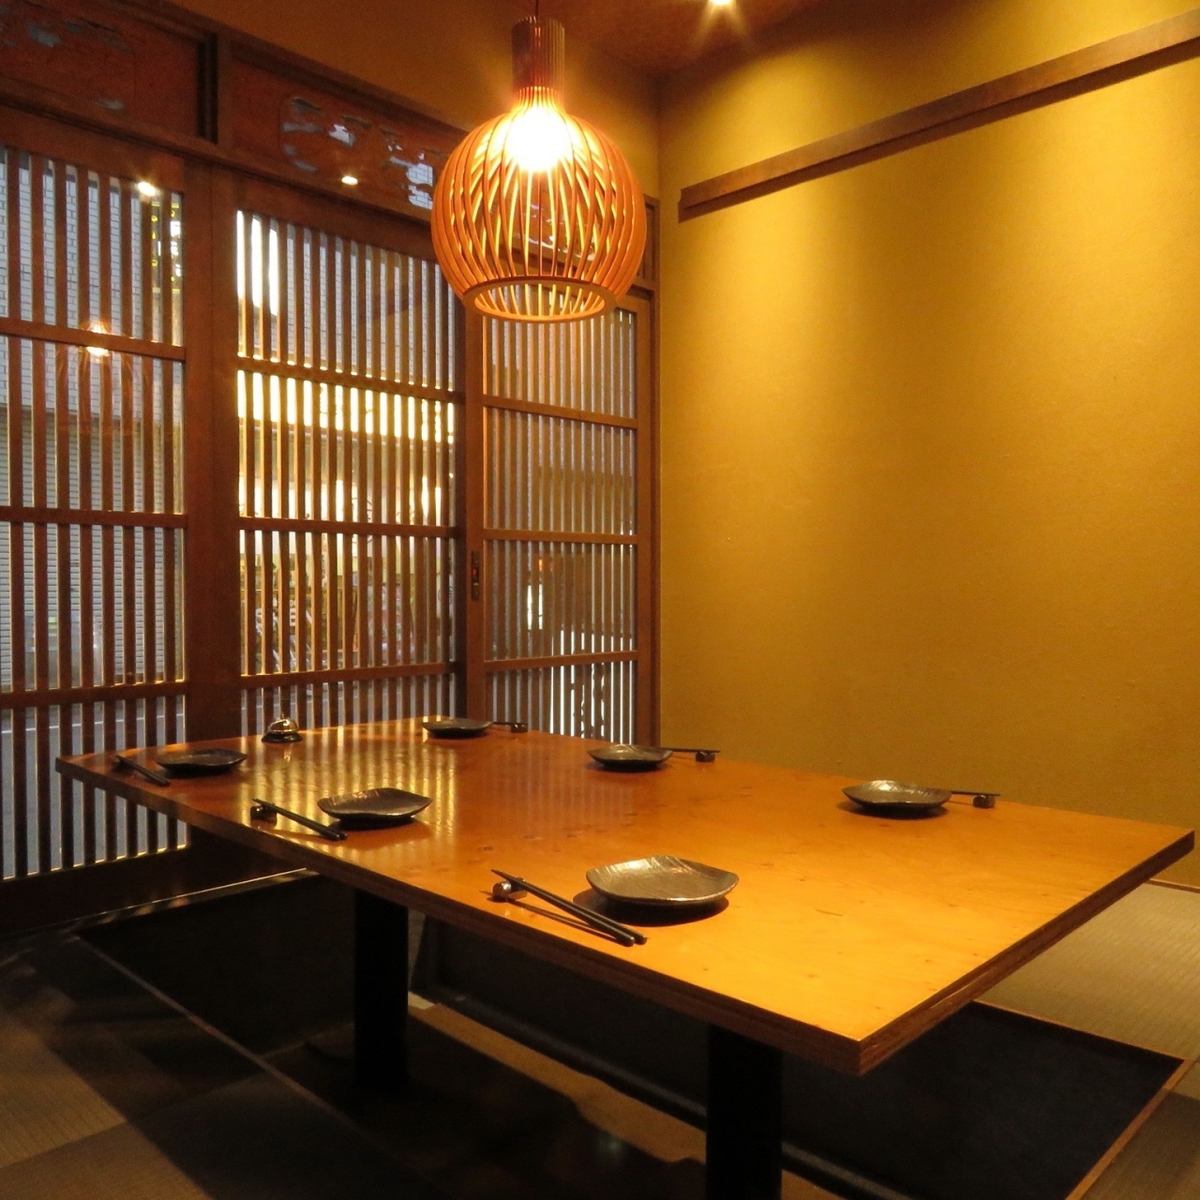 The digging-tatsu tatami room can be used by 6 to 8 people!